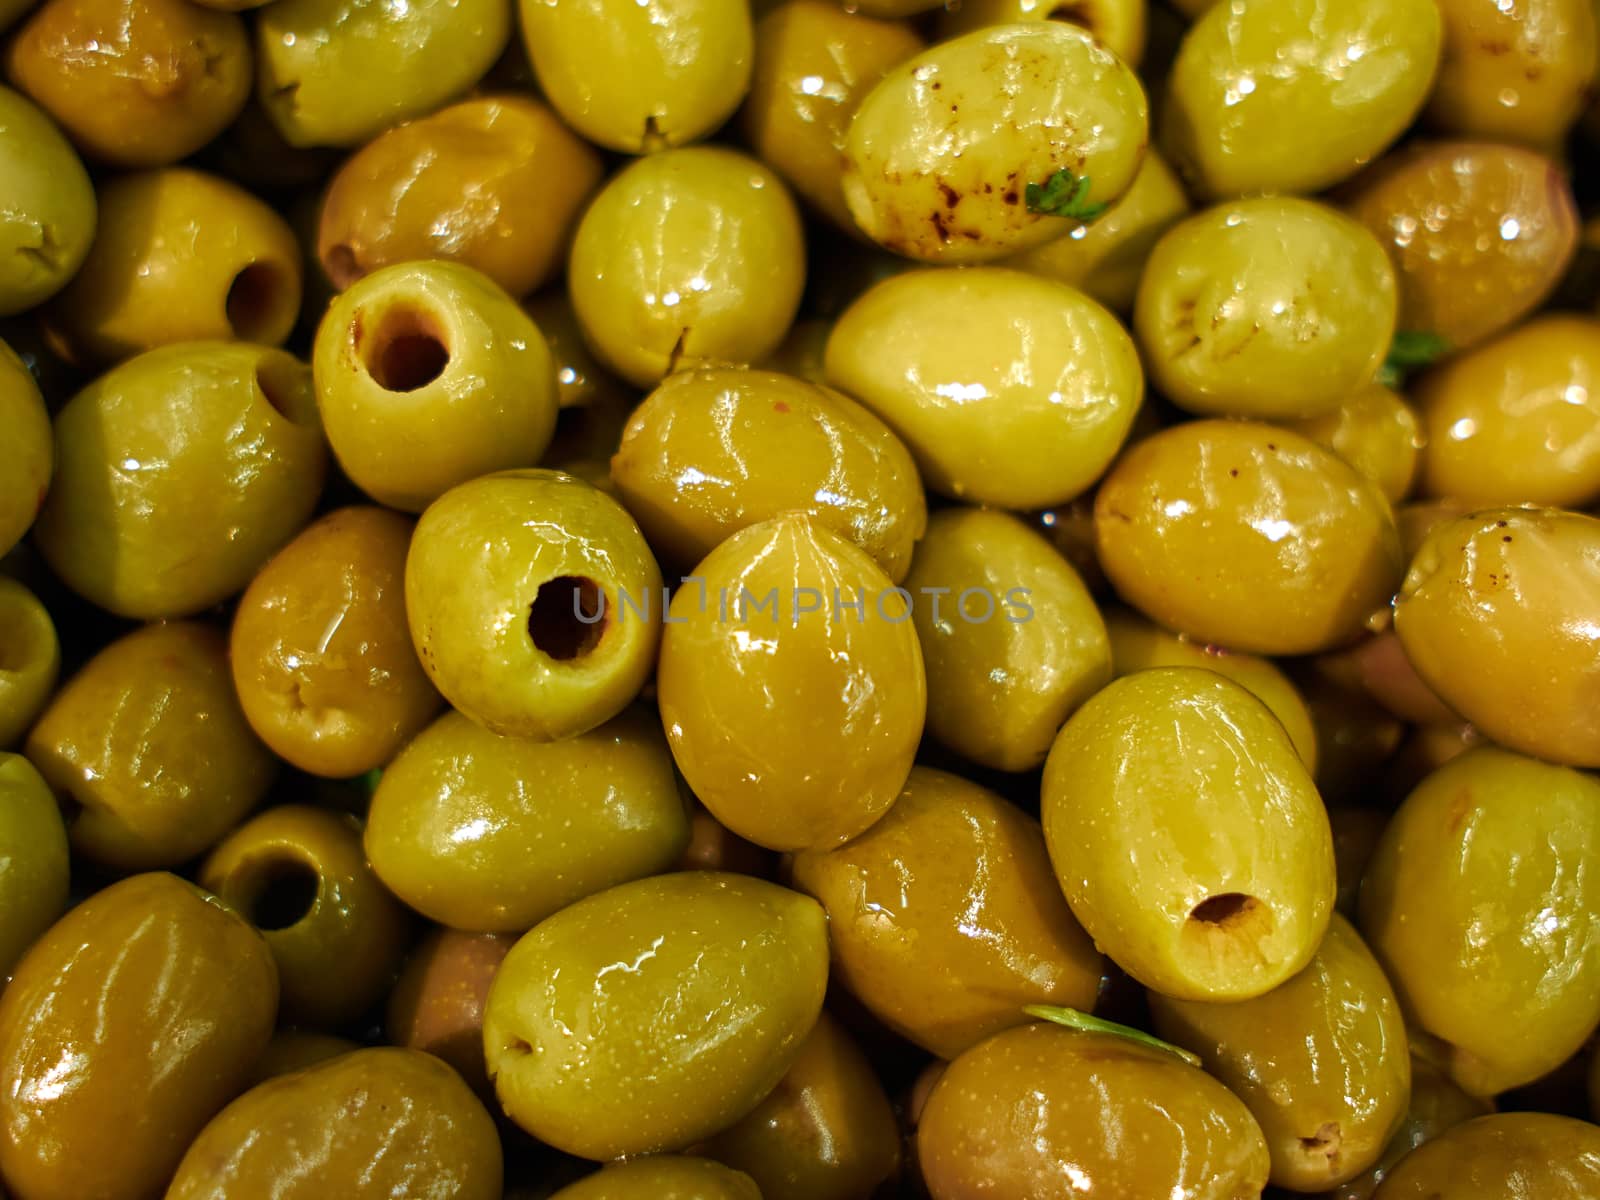 Traditional pickled Mediterranean style green olives for sale in a market shop